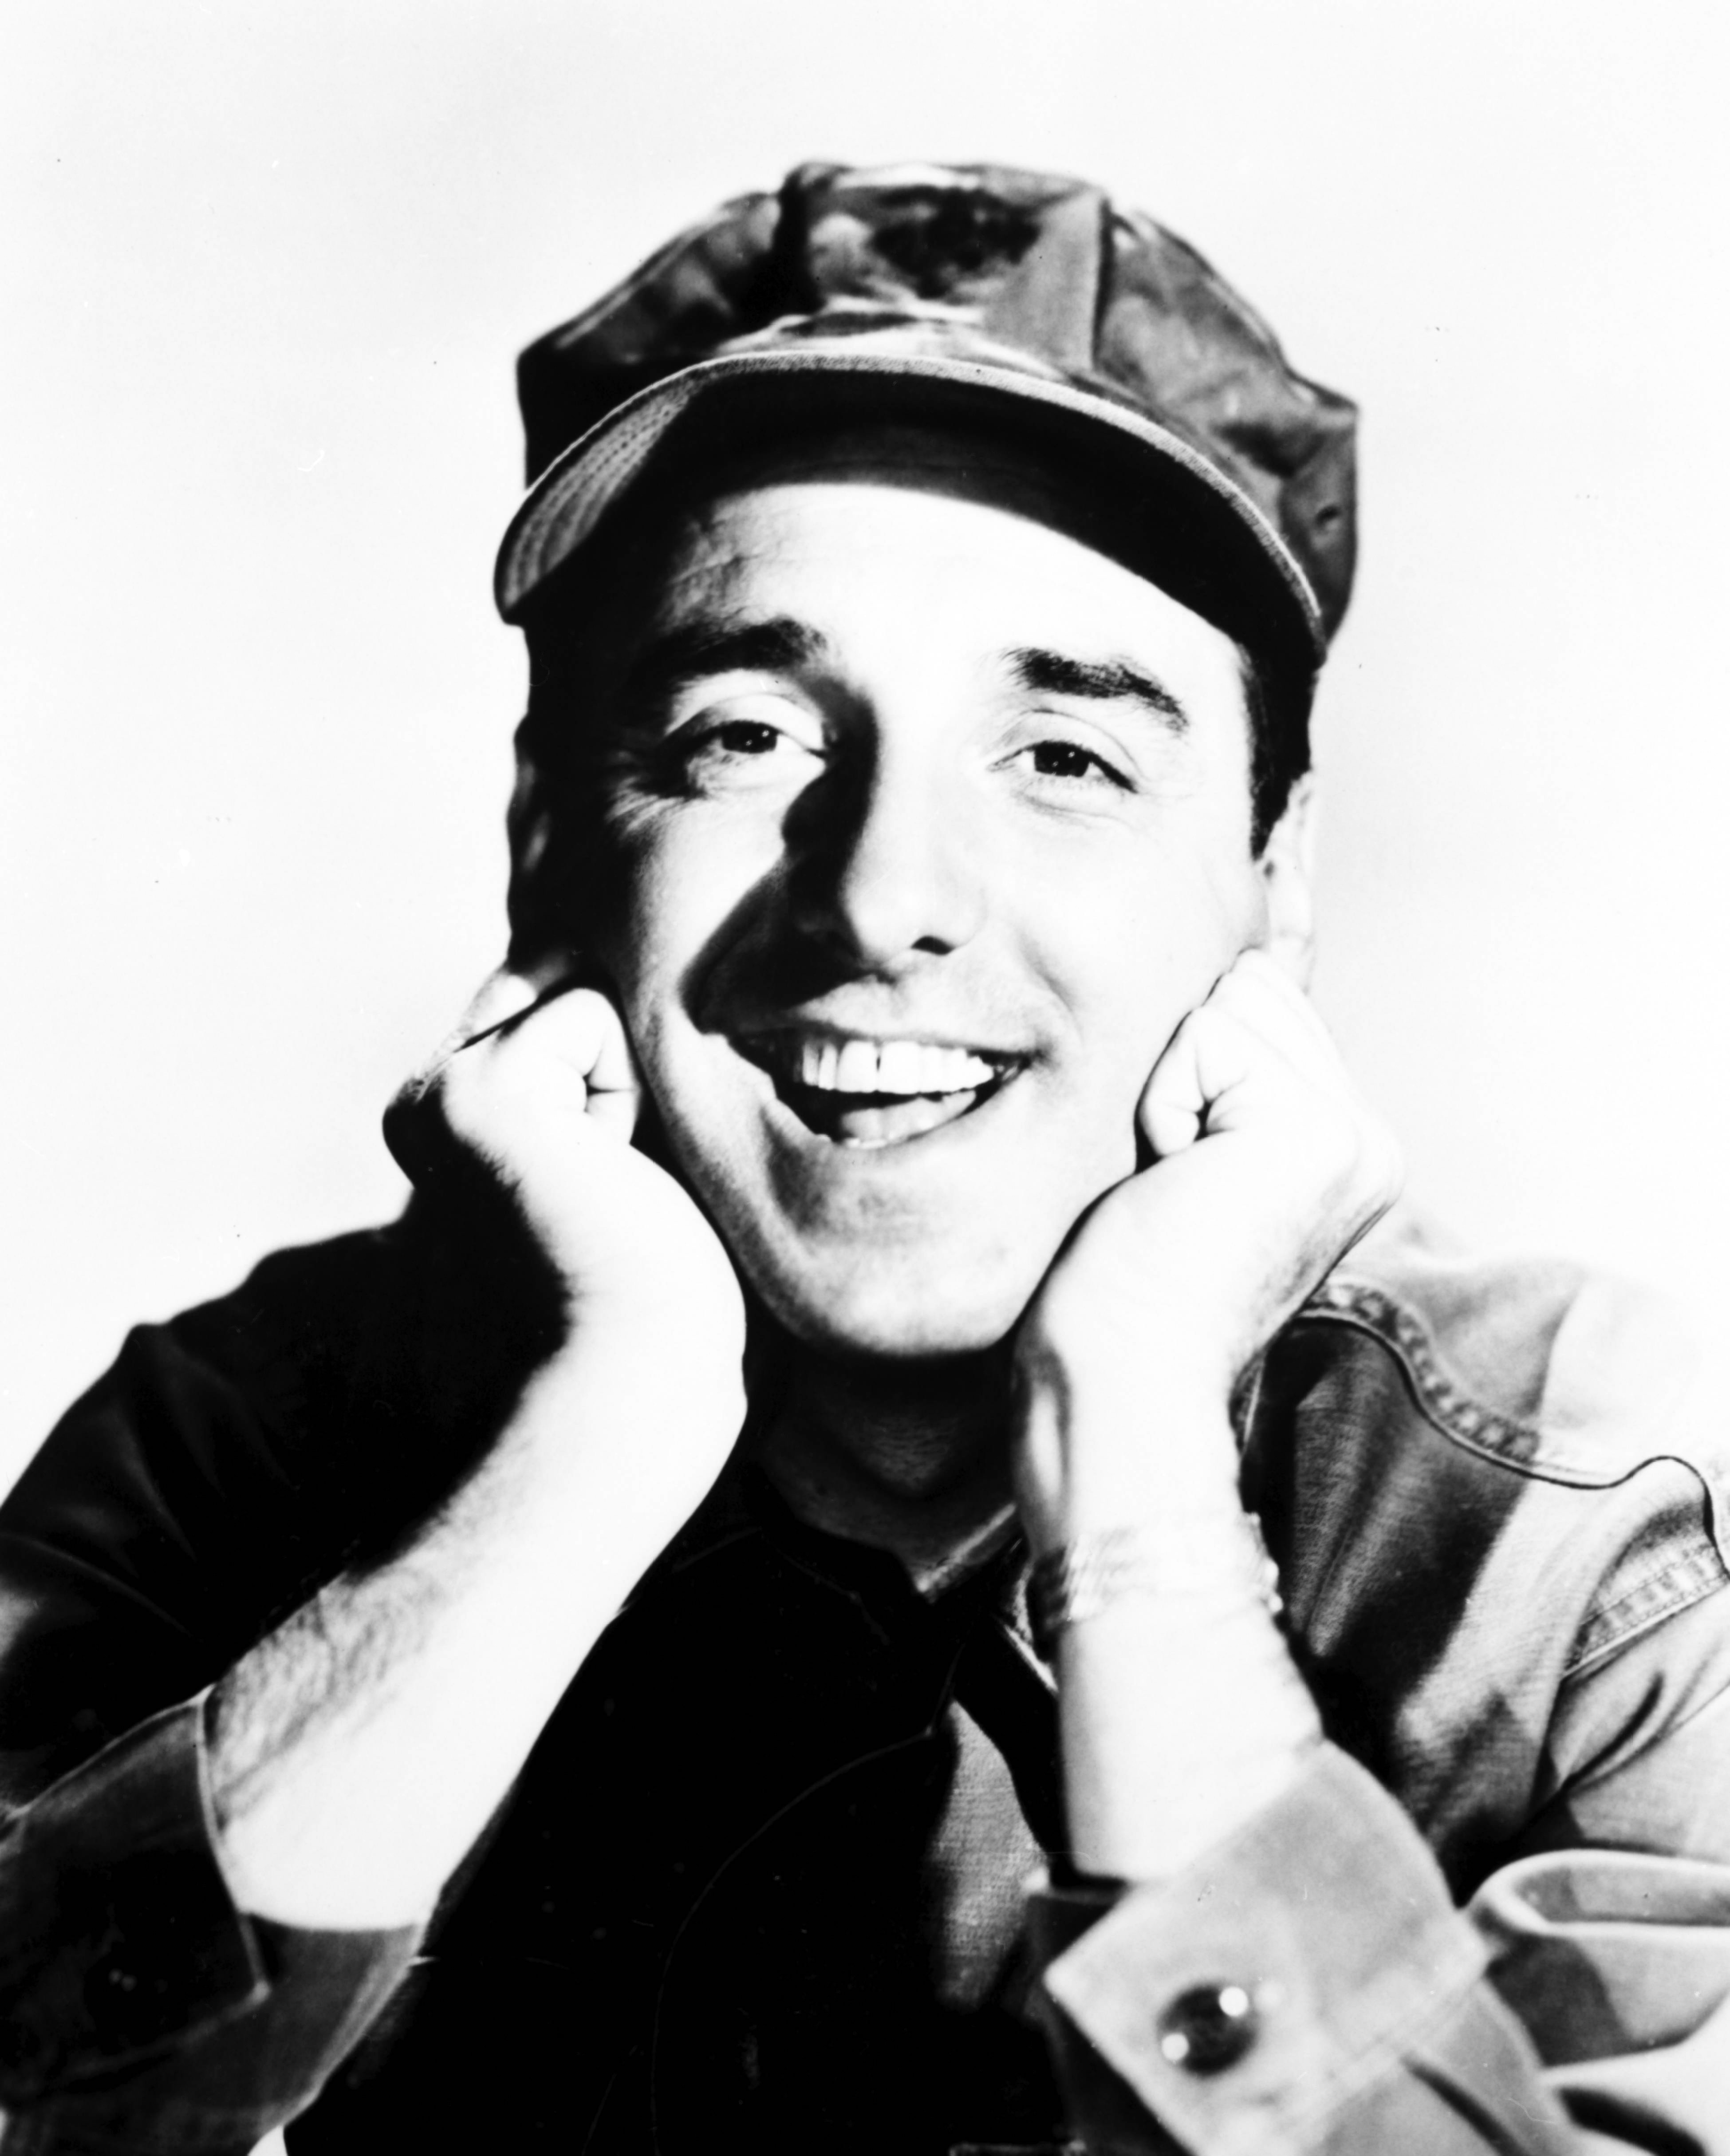 Actor Jim Nabors as Gomer Pyle